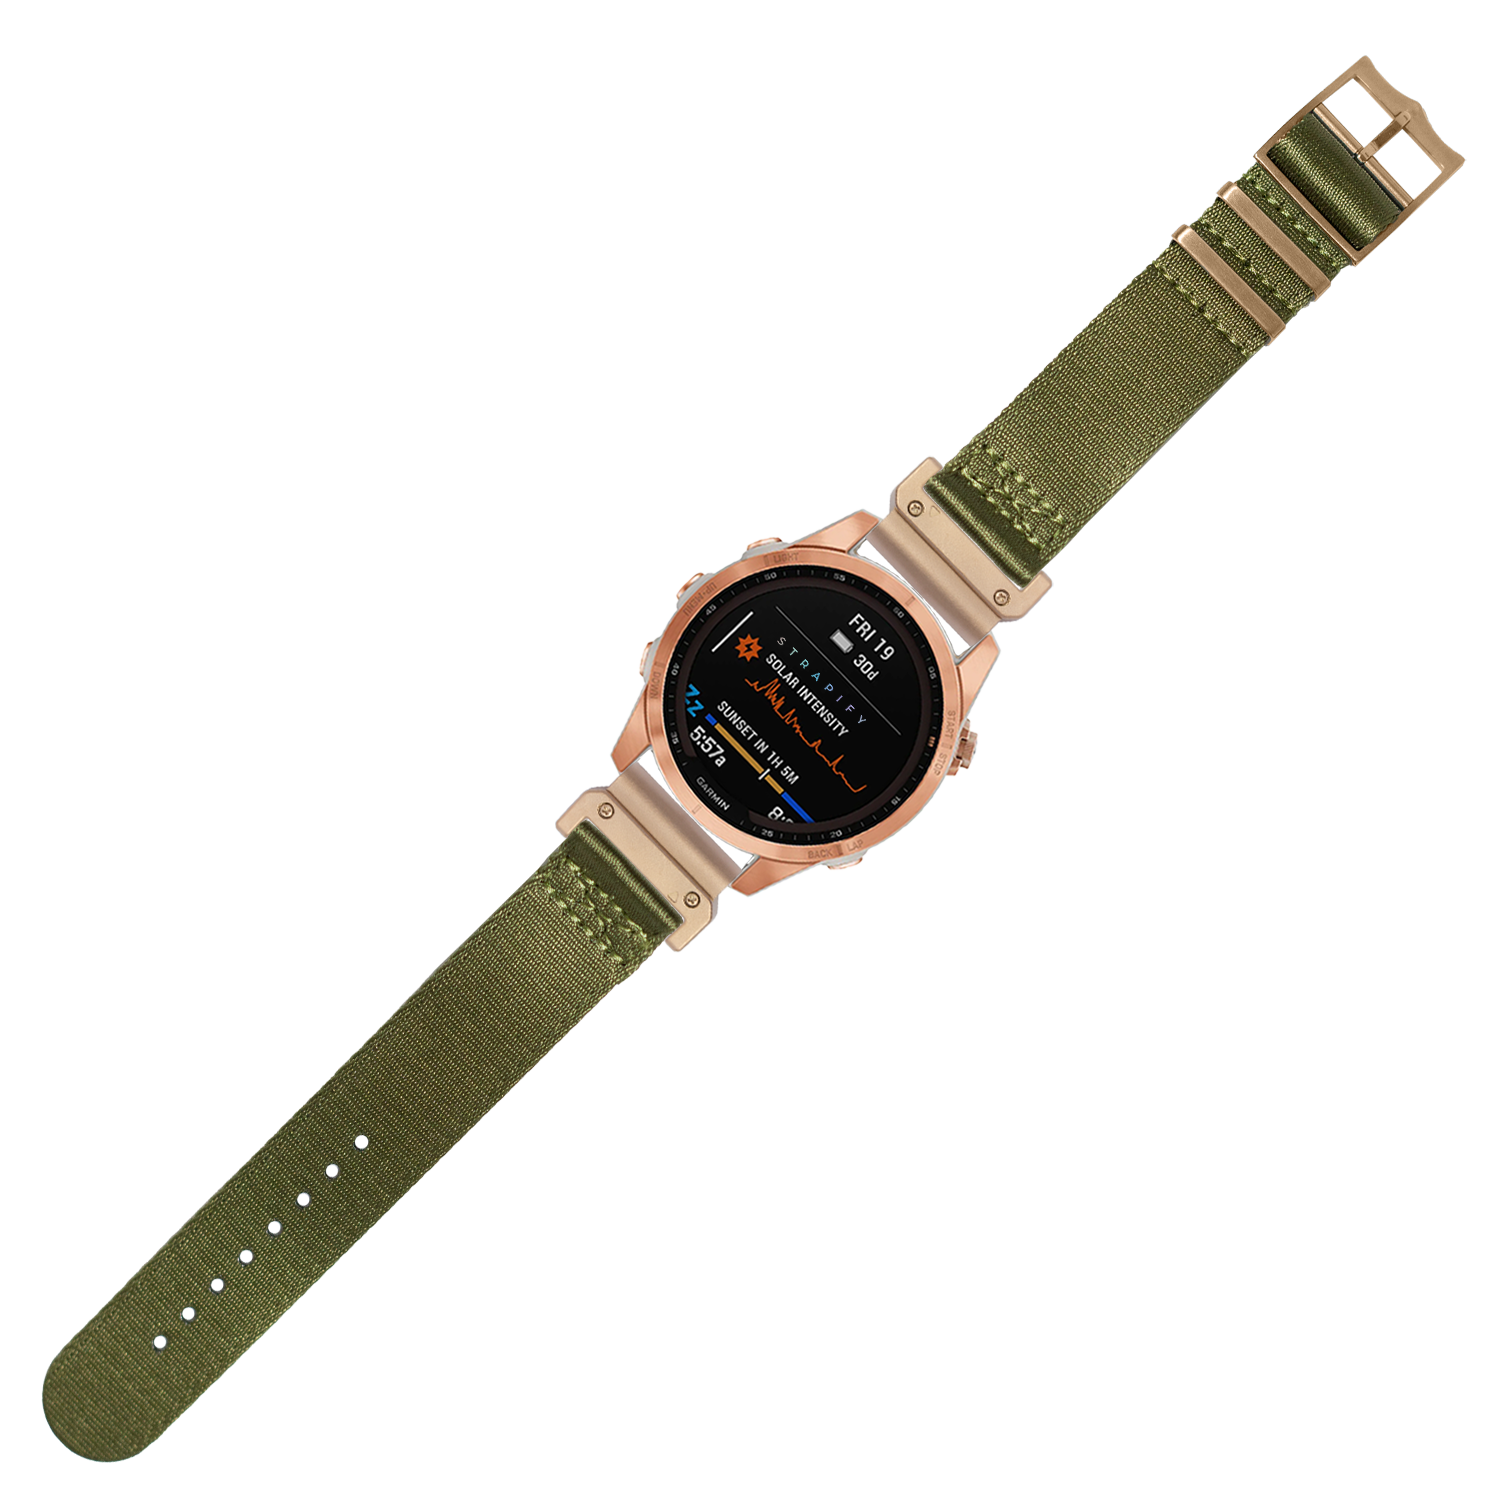 [QuickFit] Ultra Militex - Army Green [Rose Gold Hardware] 26mm